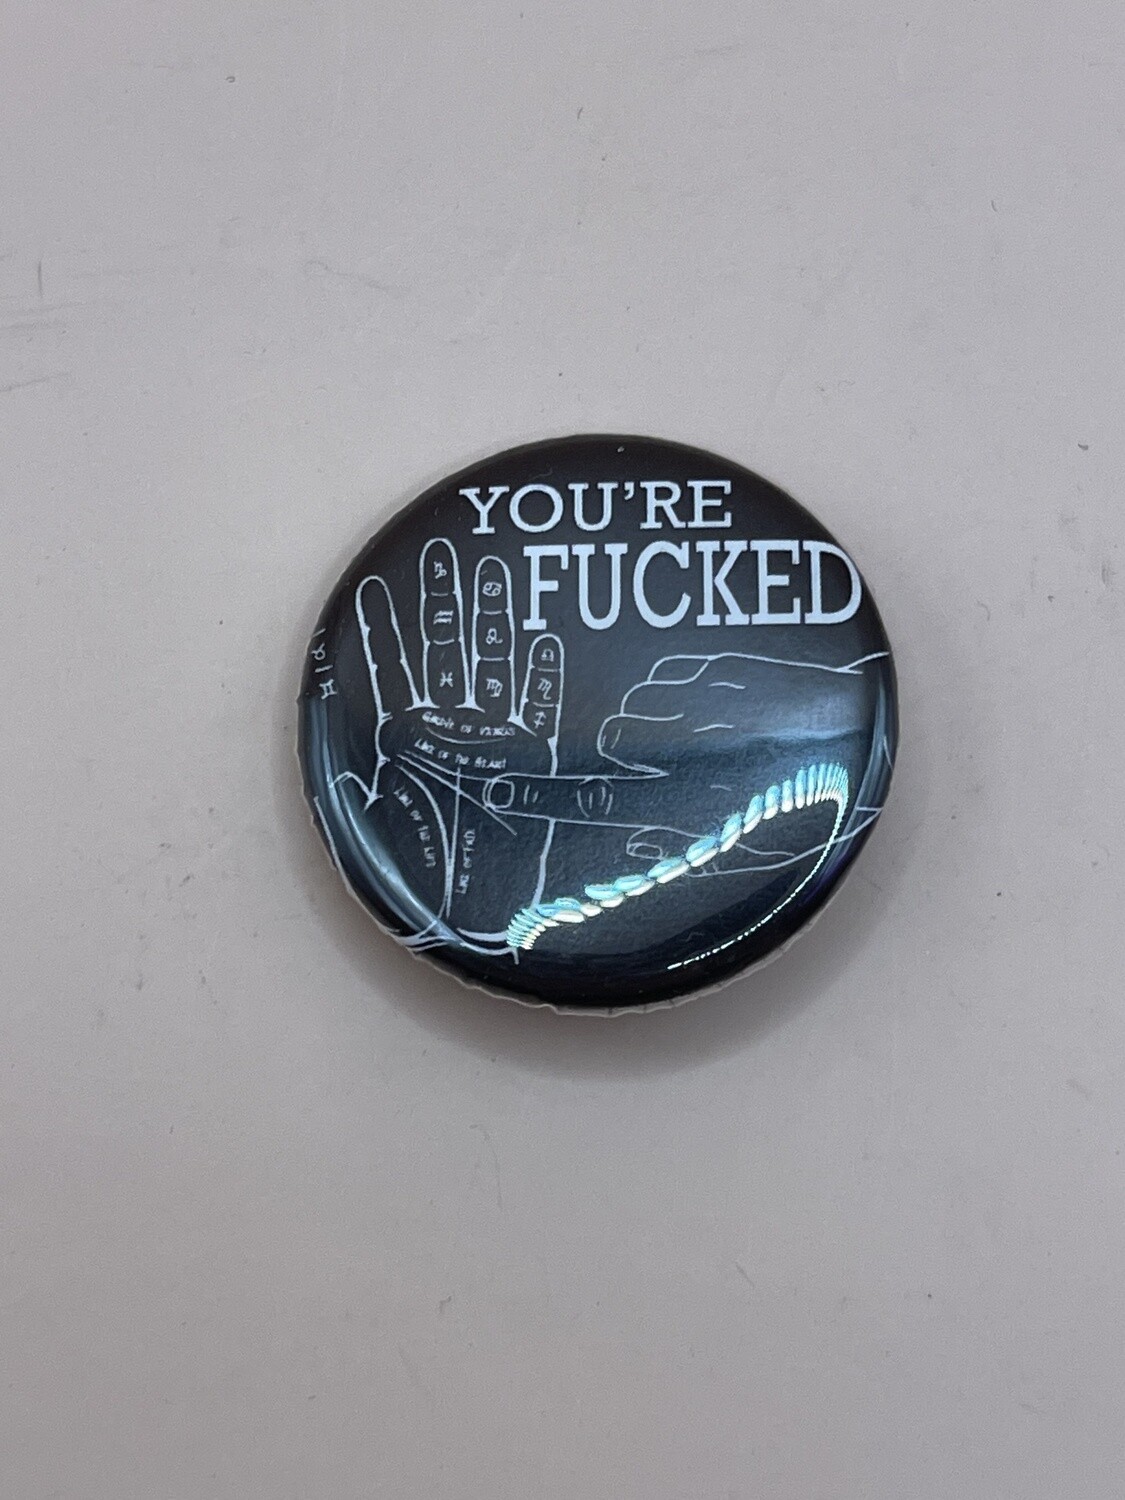 You're Fucked 1.25 inch button